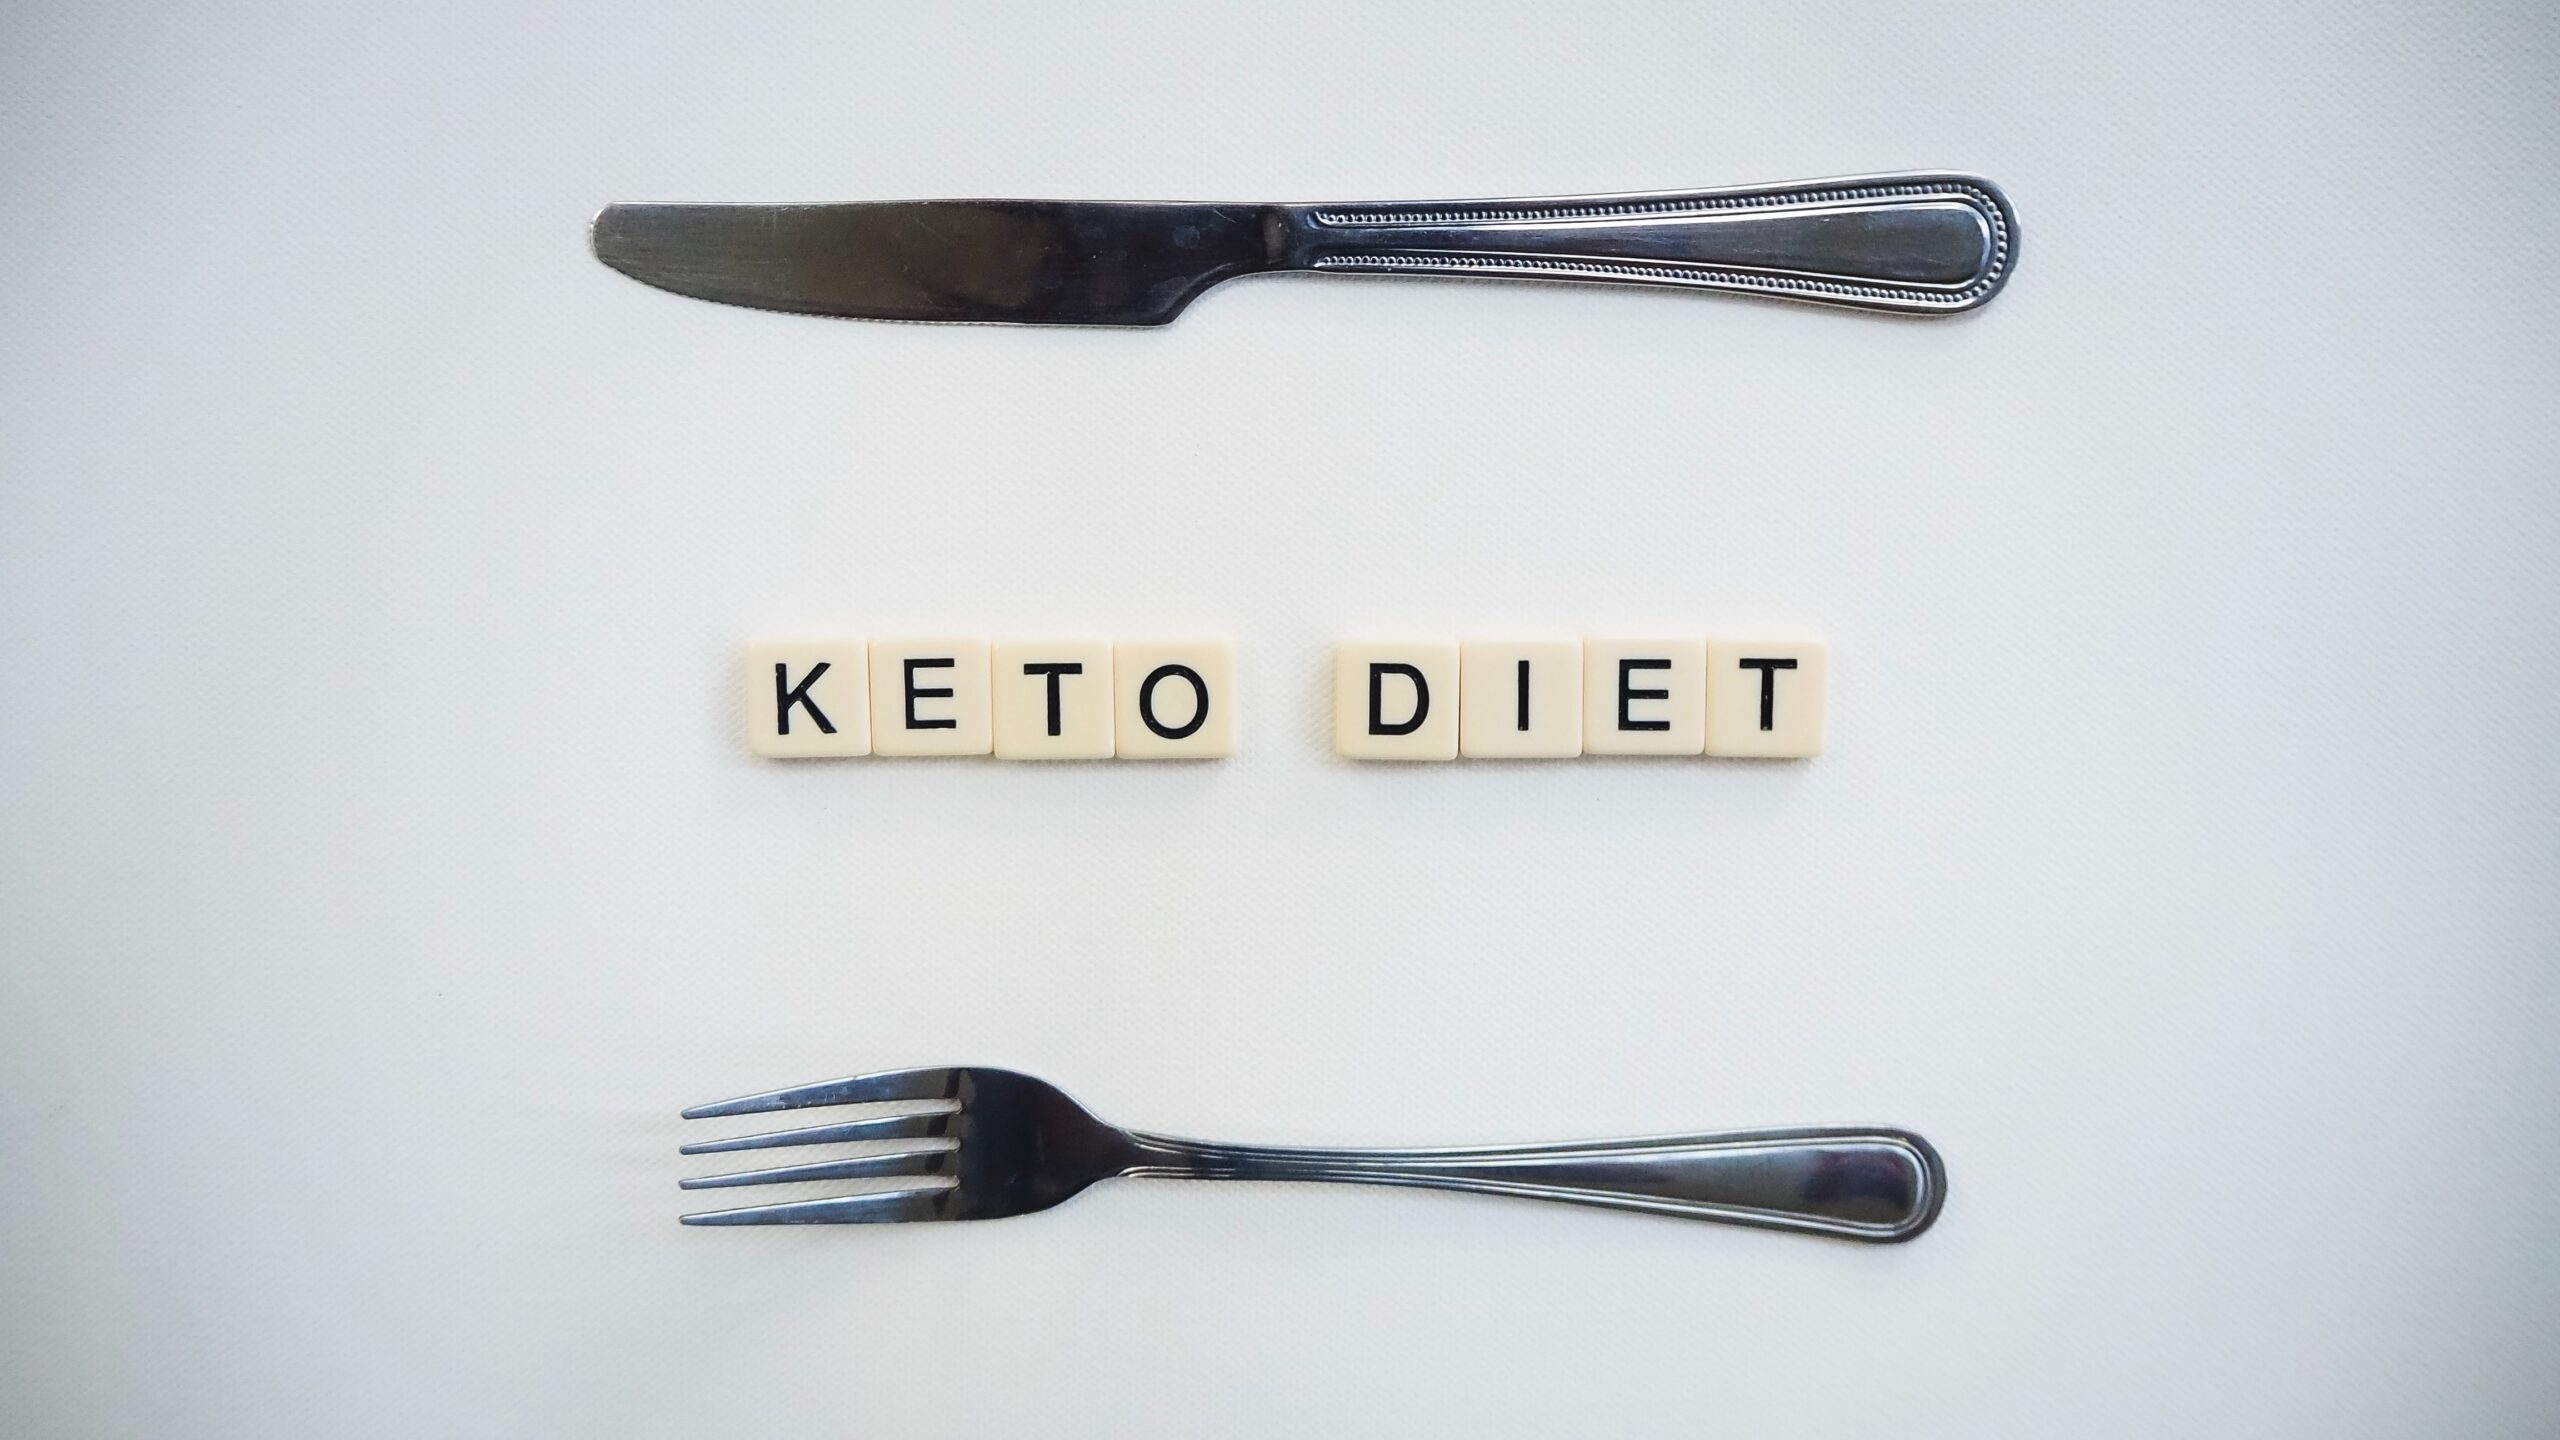 A Better Way to Enjoy The Ketogenic Diet